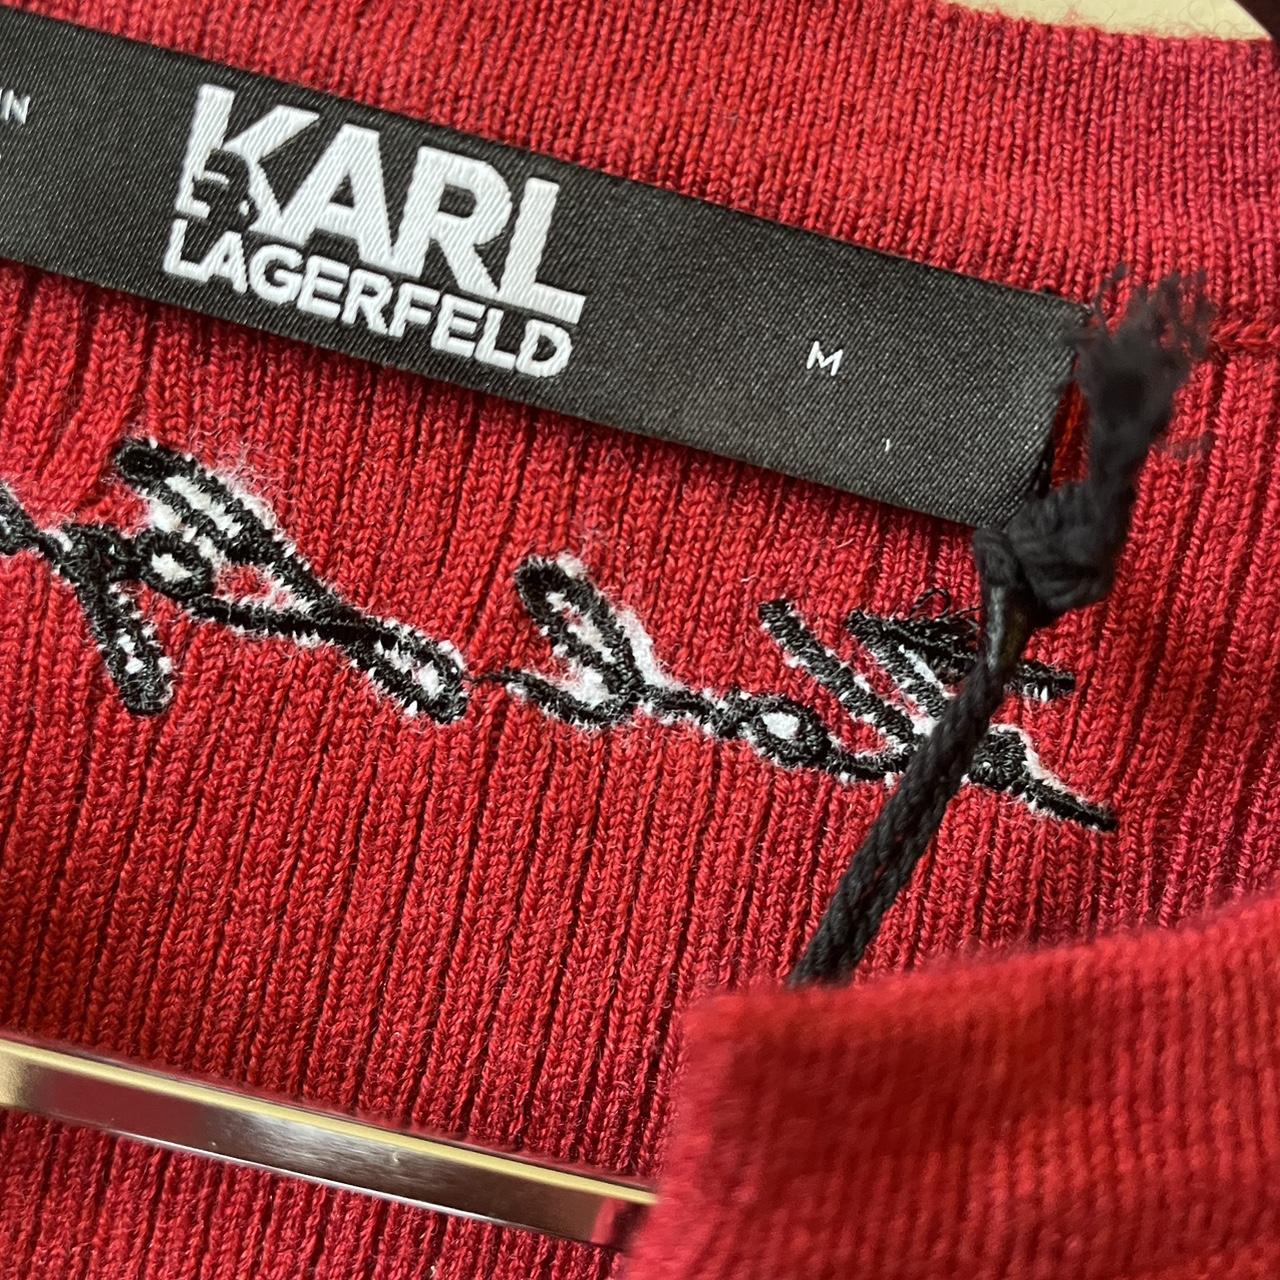 New with tag and bag Karl Lagerfeld size M red... - Depop